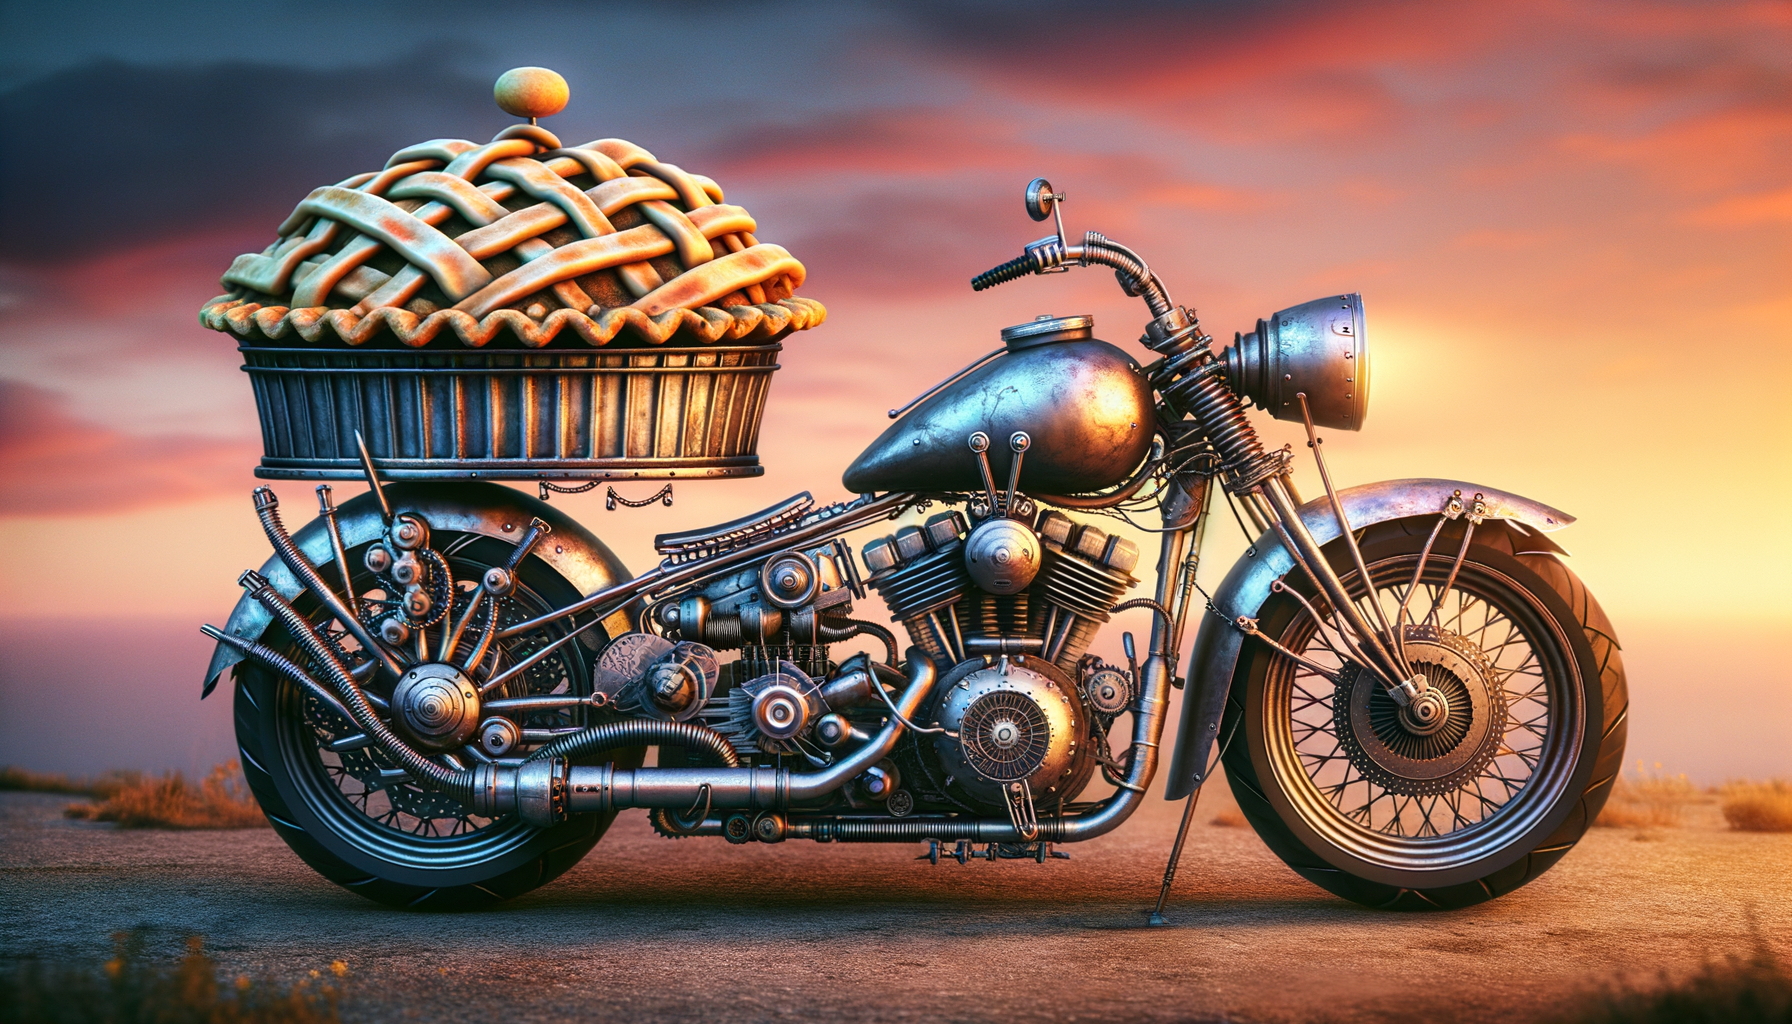 pie wagon is a custom motorcycle that delivers a unique concept, showcasing exceptional design and craftsmanship.